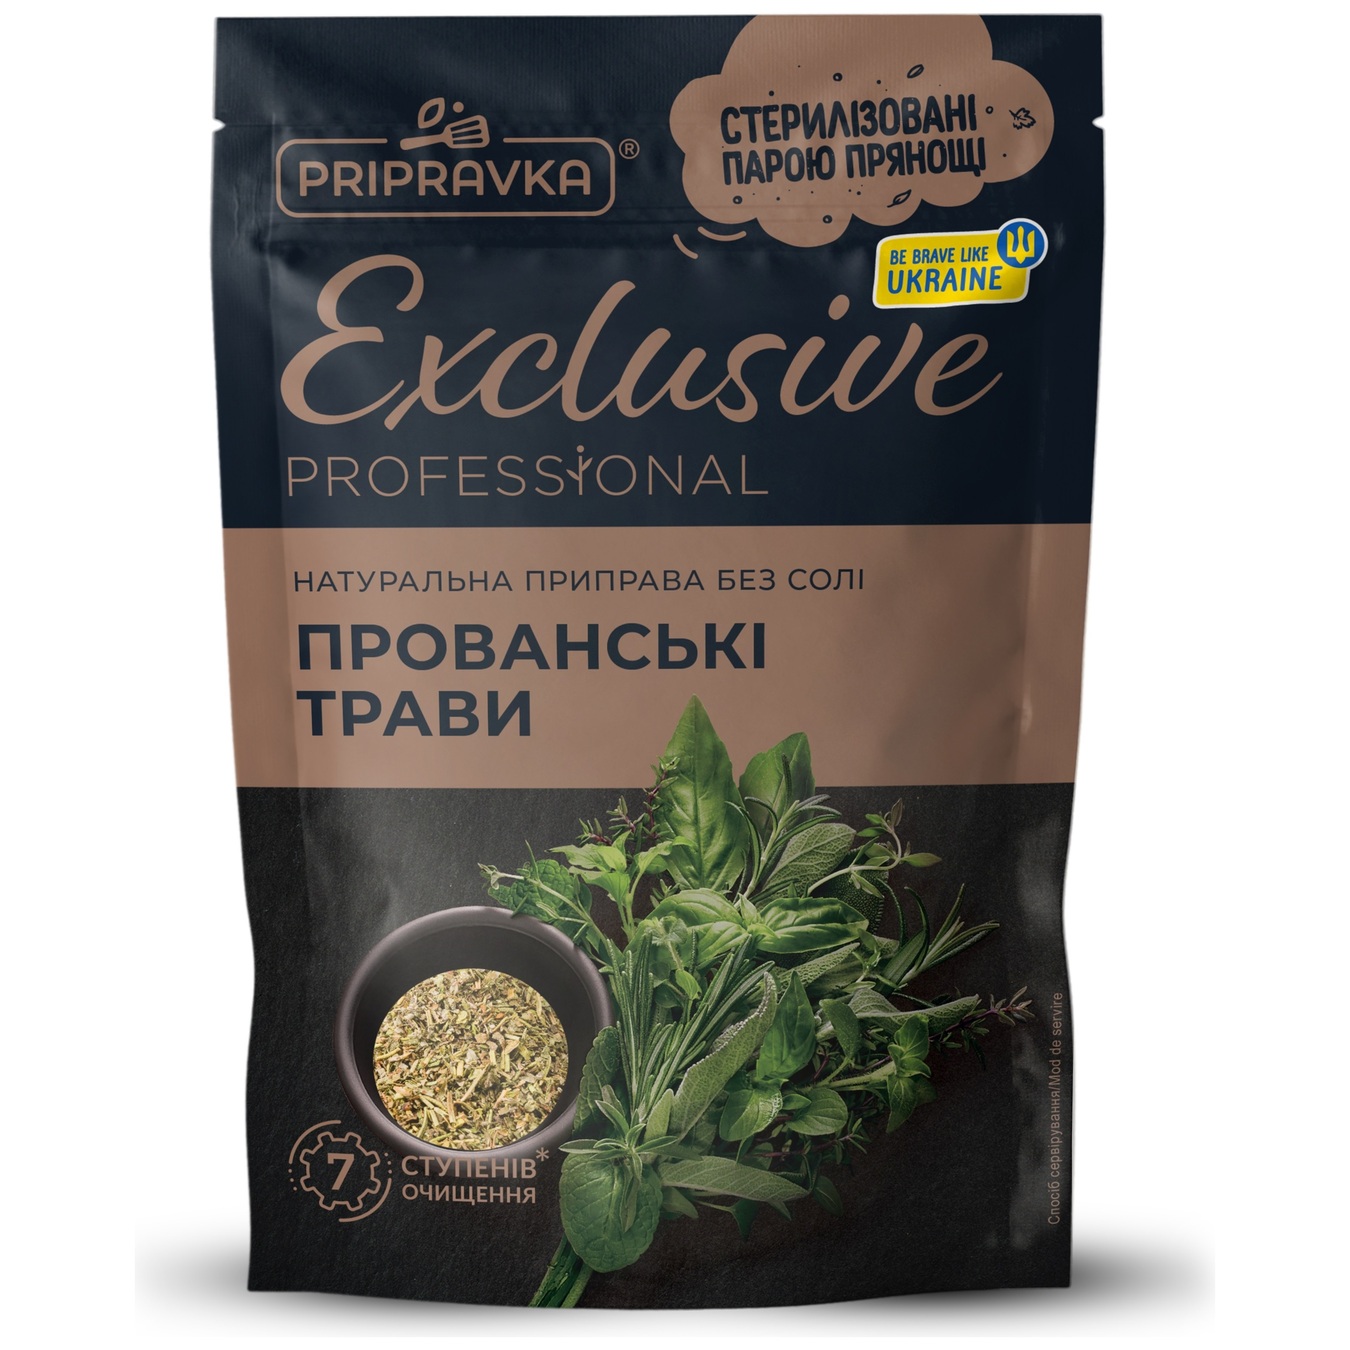 Pripravka Exclusive Professional Provence Herbs Natural Withiut Salt Spice Mixture 30g